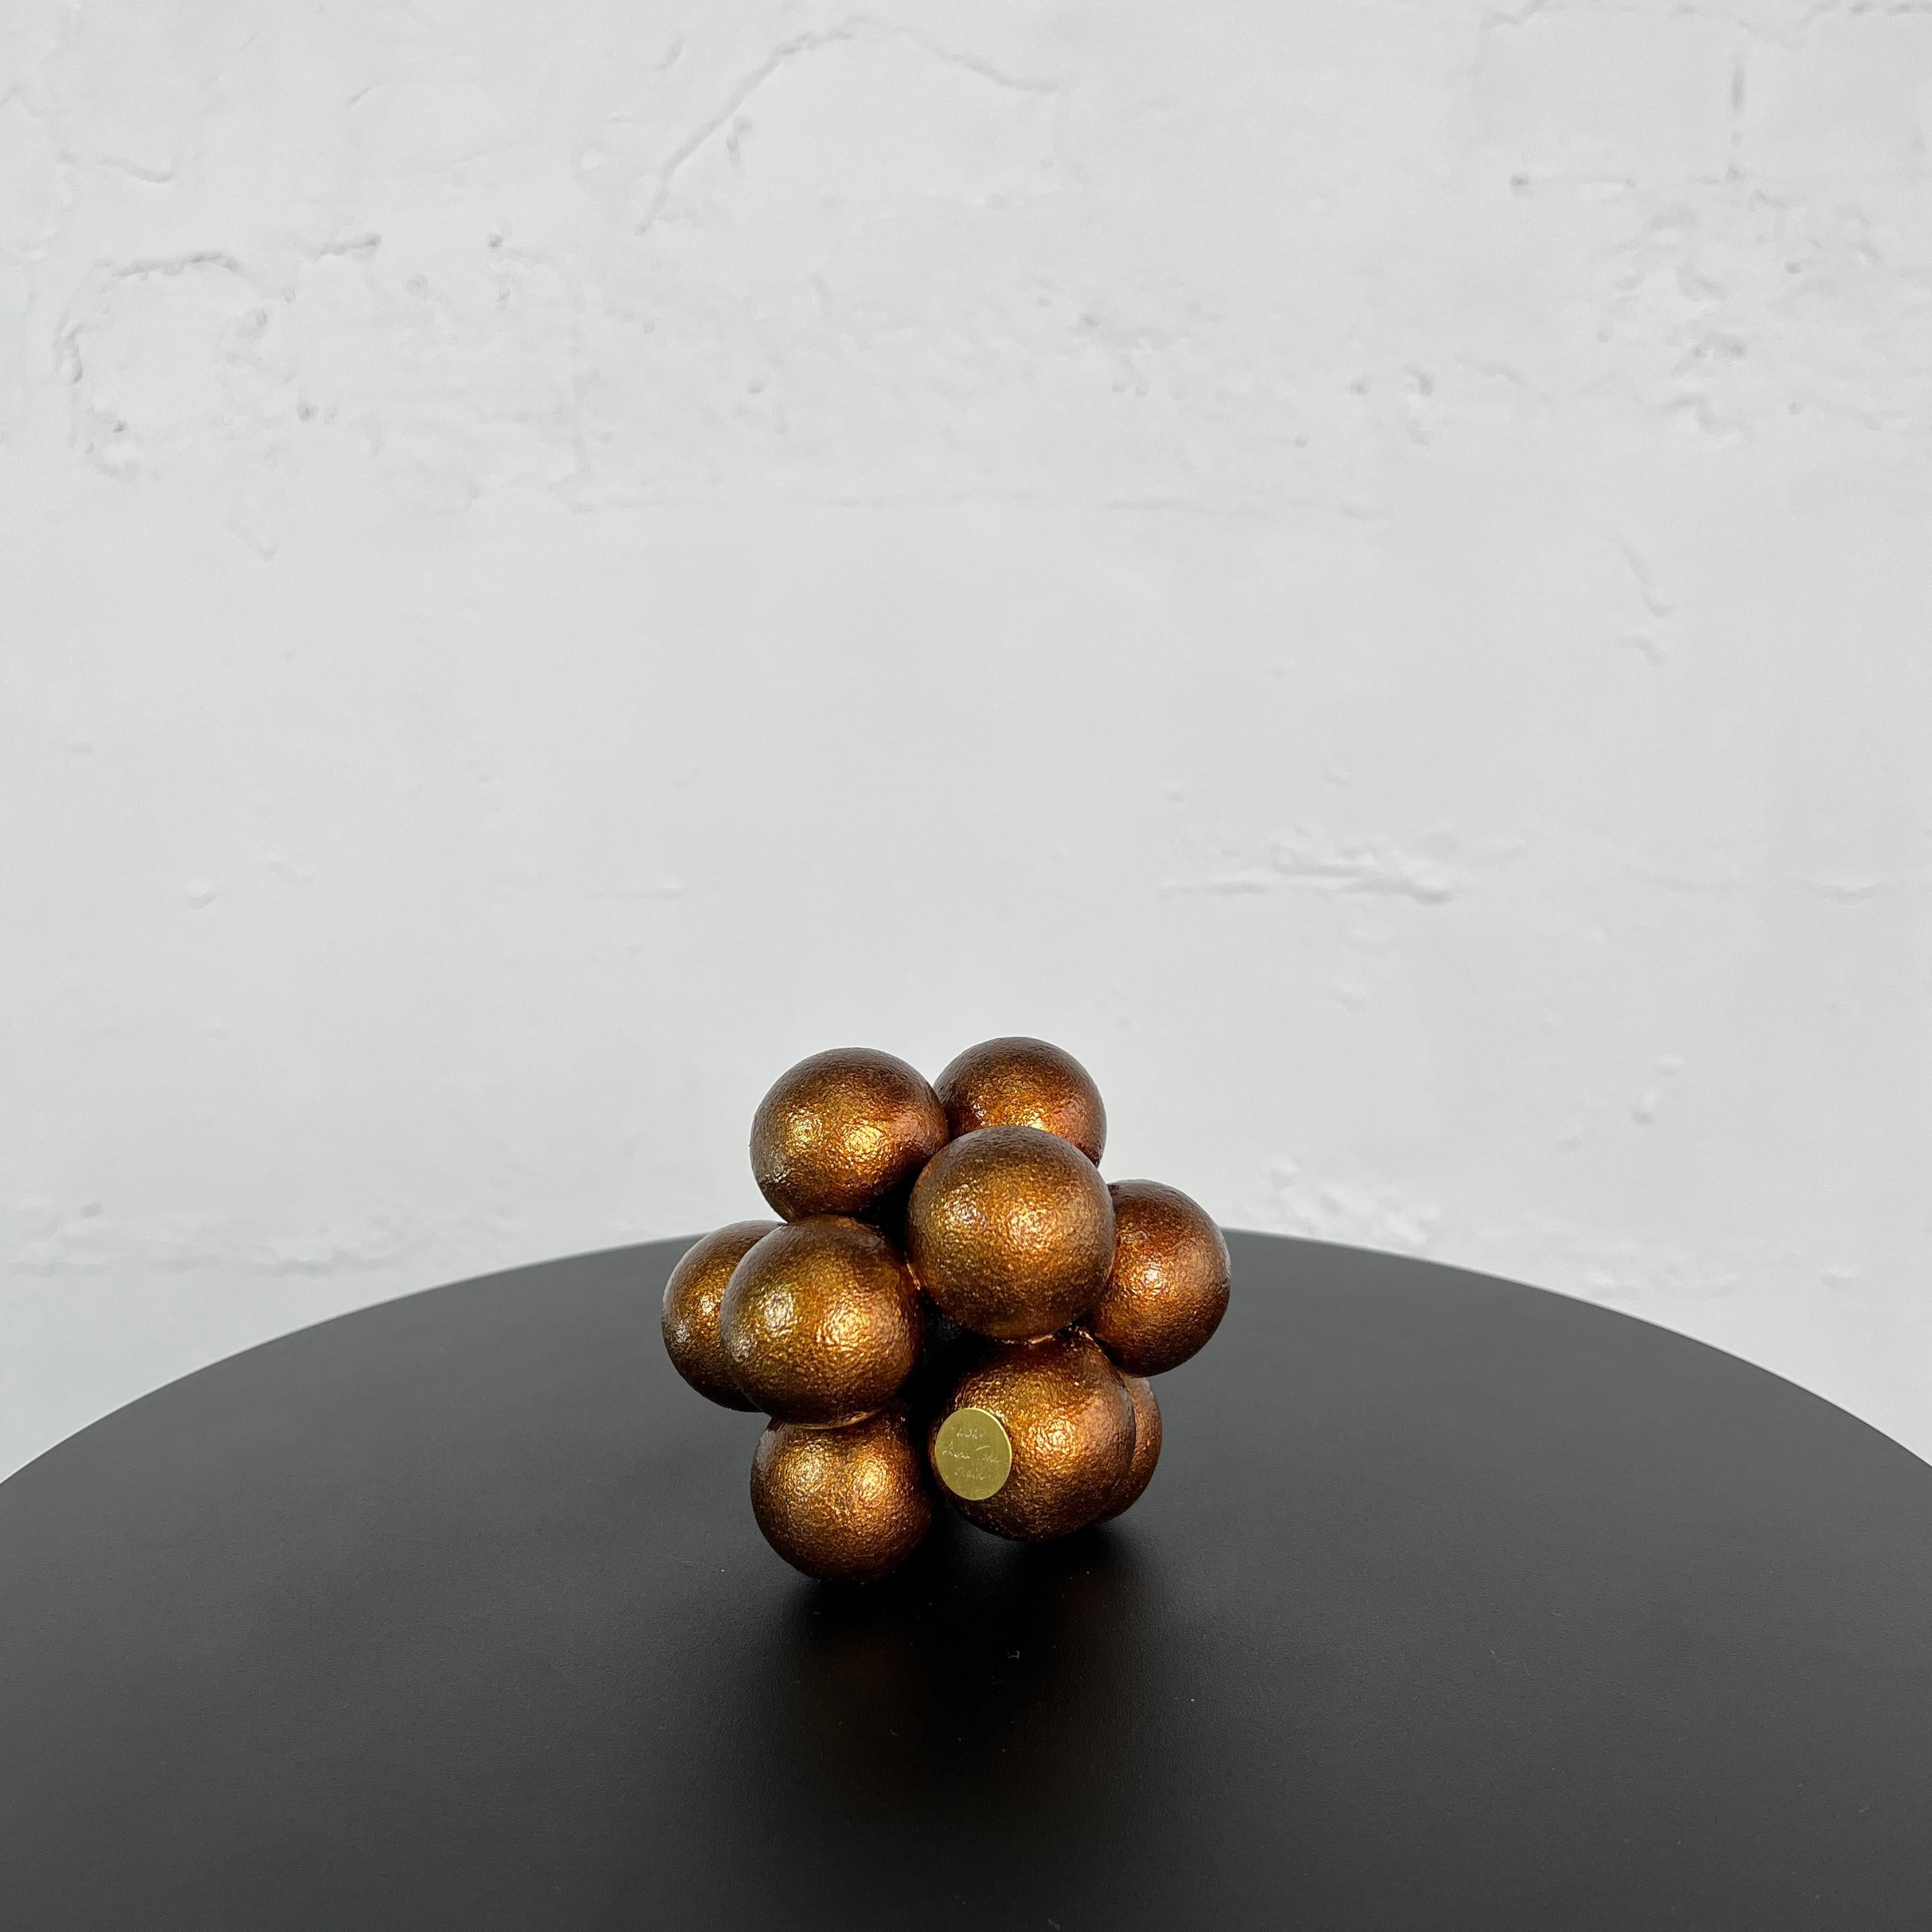 Made in Spain, 2024.
Pure symbolism makes this series of sculptures ideal for table or floor-pedestal installation in the office, bedroom, cabinet, reception, or hall.

Location and Delivery from Spain
Materials: wood, acrylic, varnish